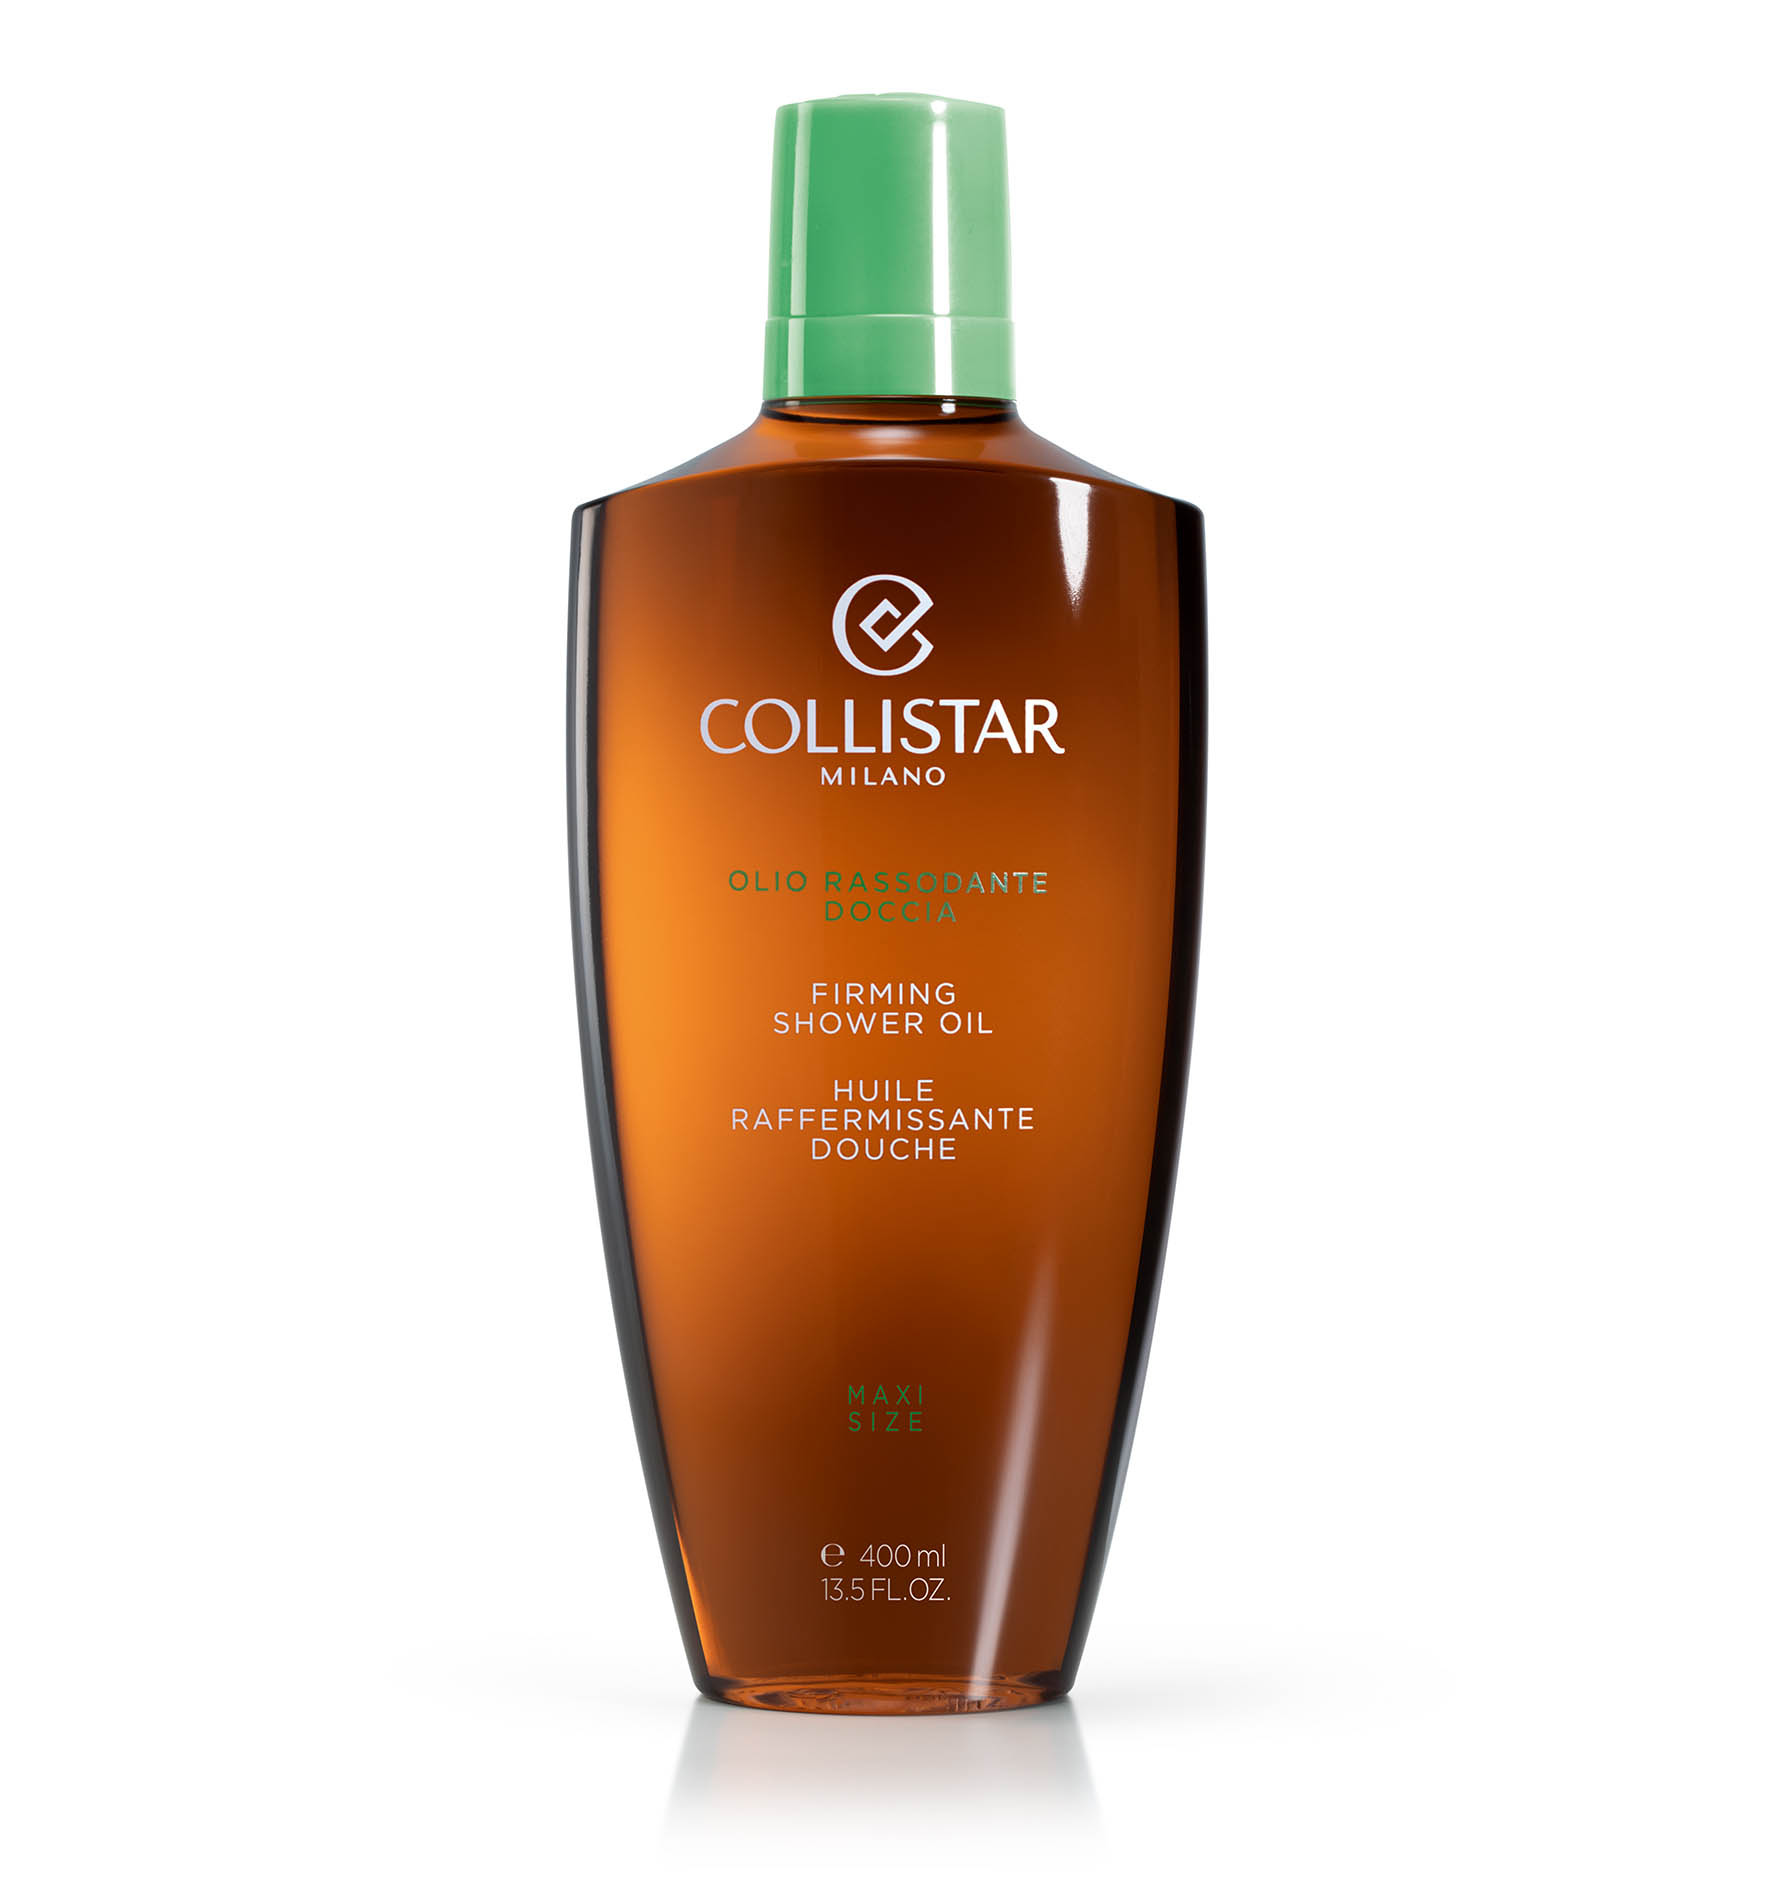 FIRMING SHOWER OIL - Dry or dehydrated skin | Collistar - Shop Online Ufficiale